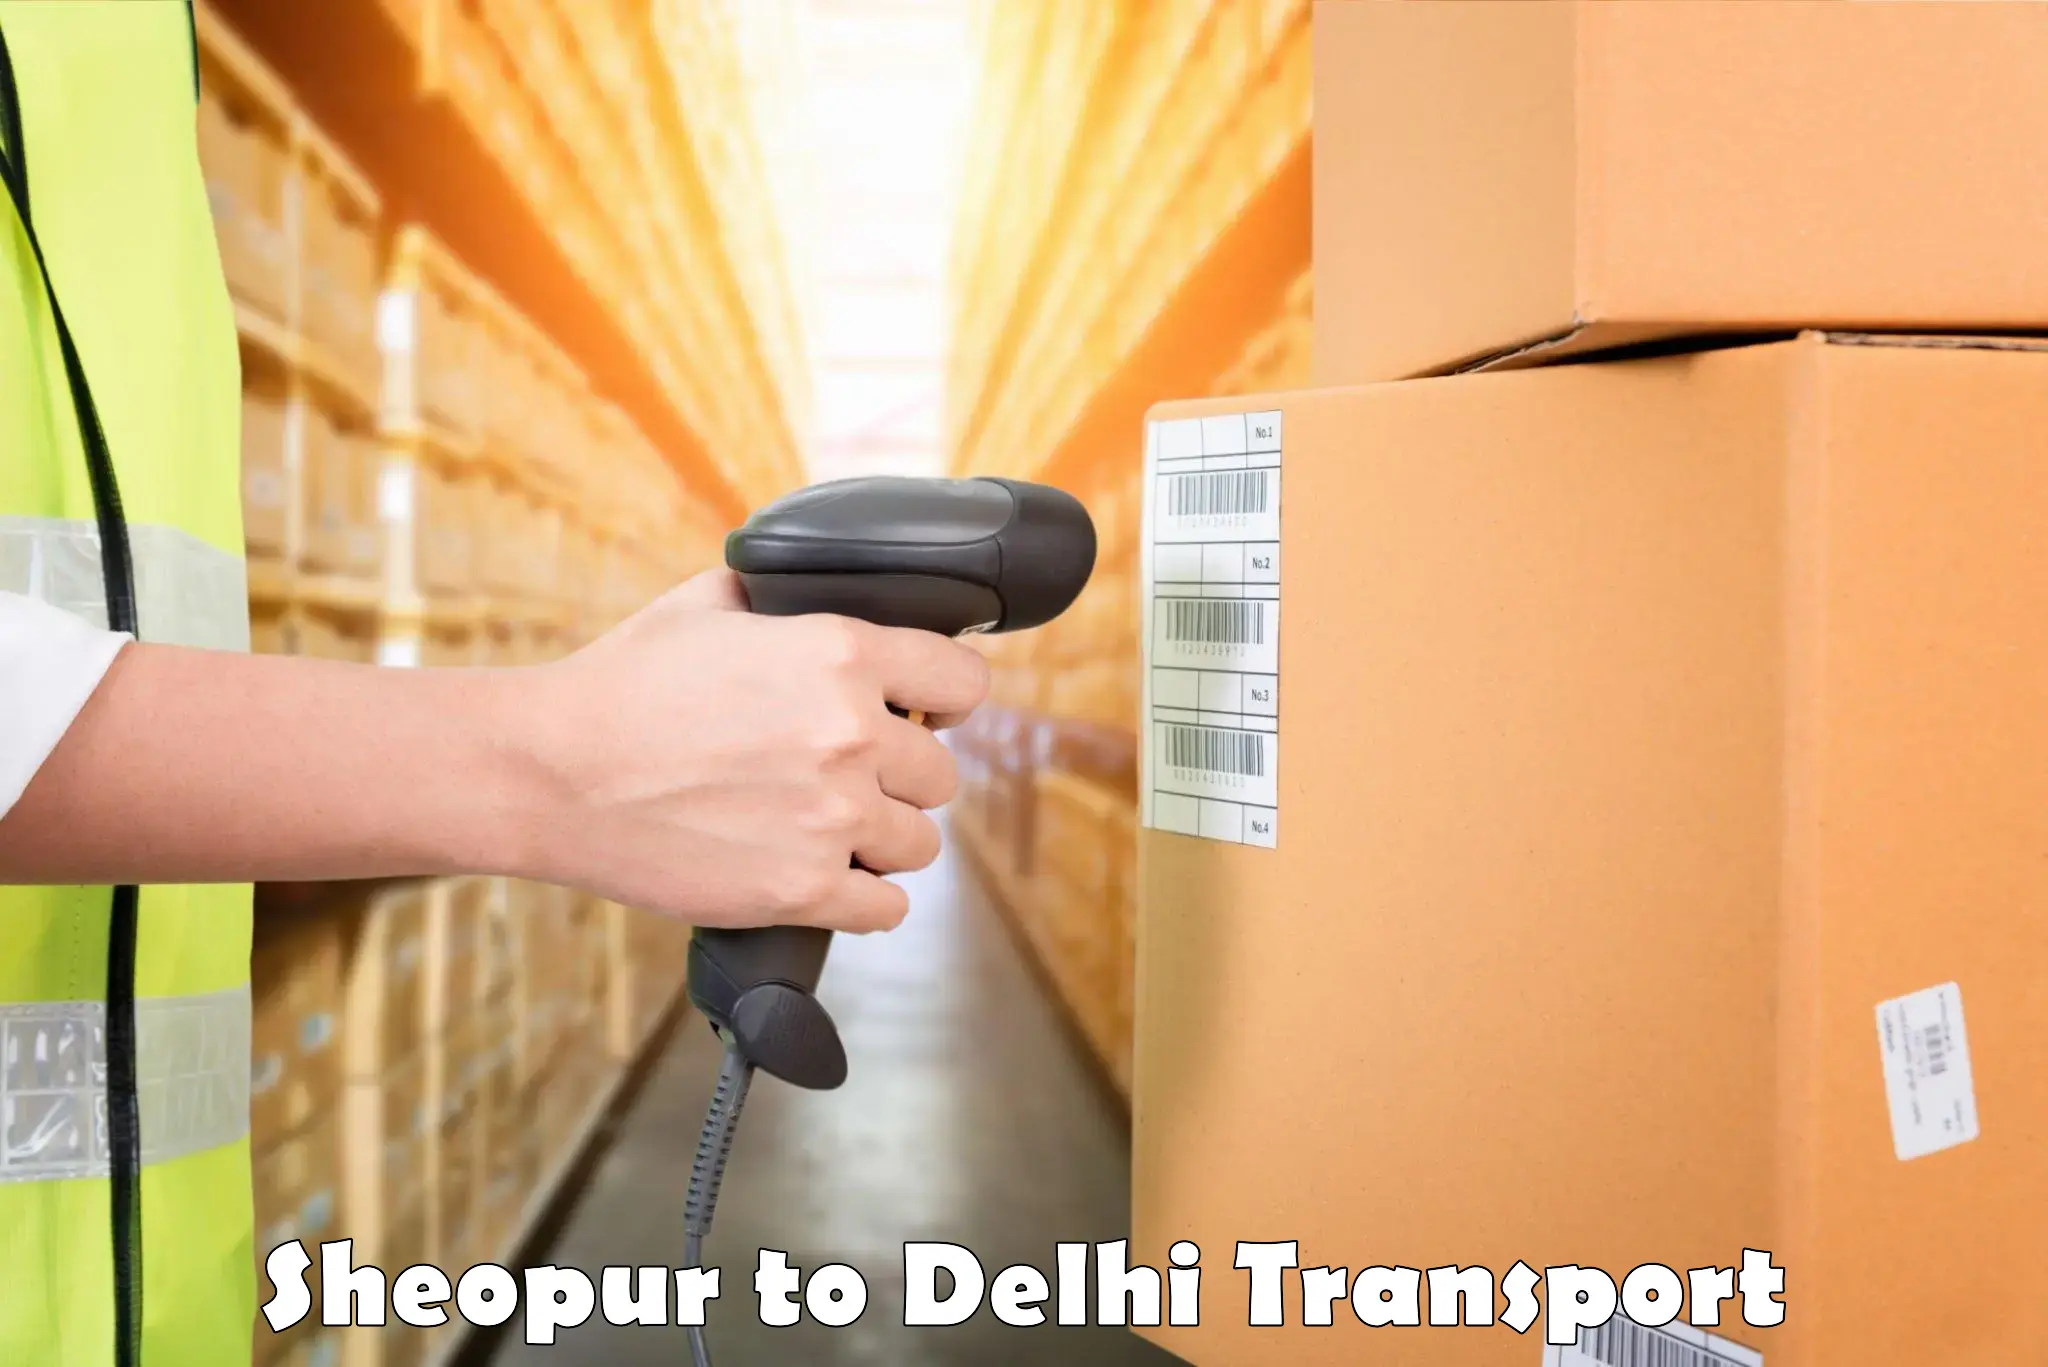 Container transport service Sheopur to NCR